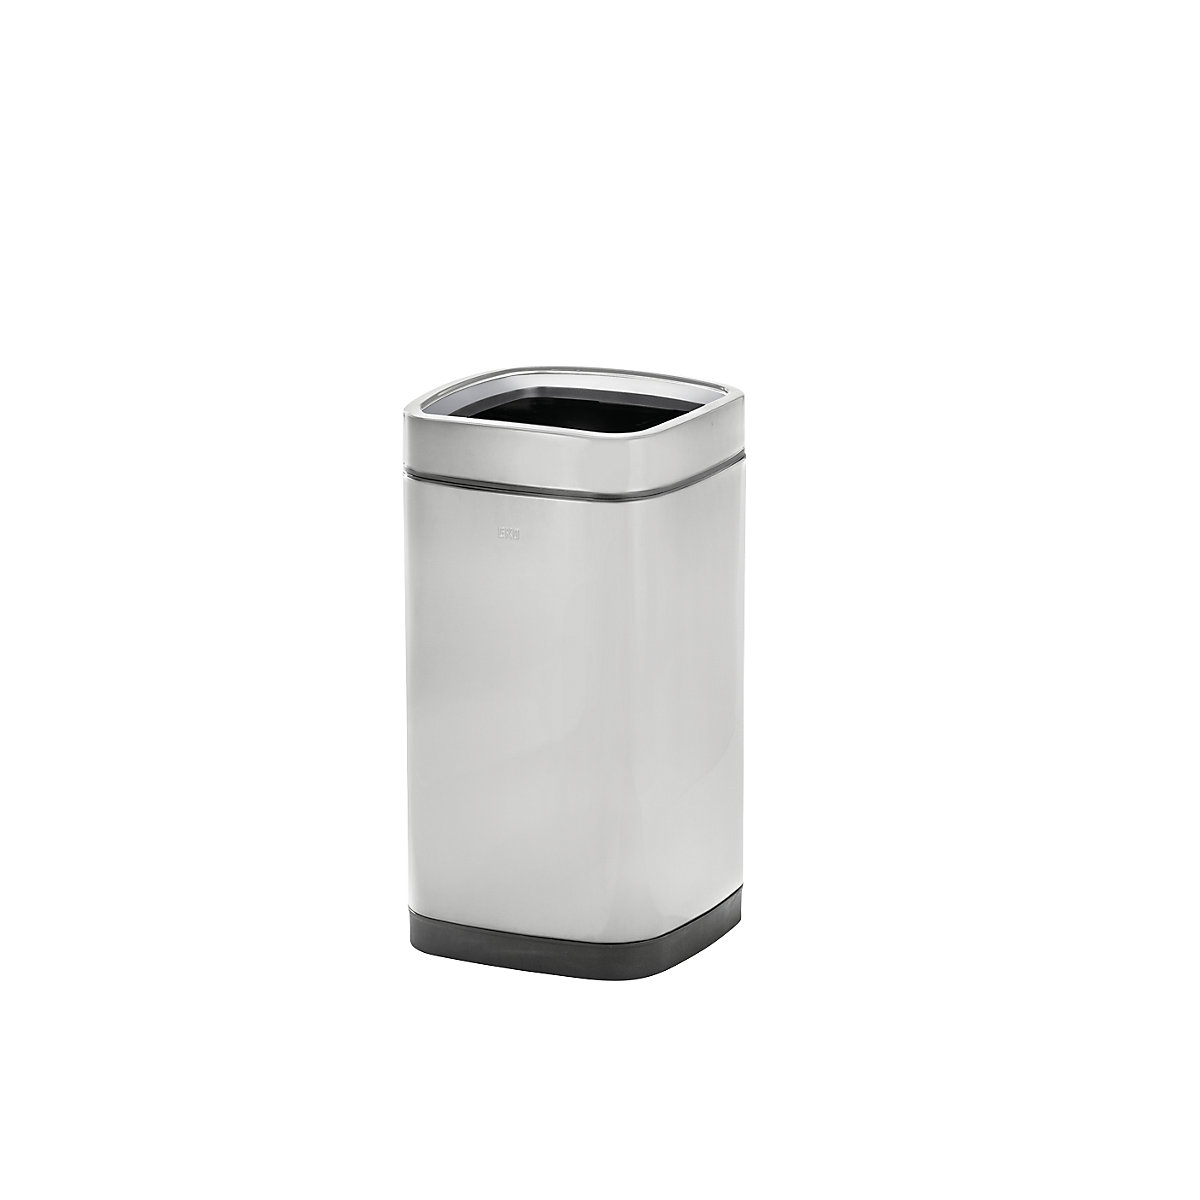 Waste paper bin with inner container – EKO, capacity 28 l, white-4